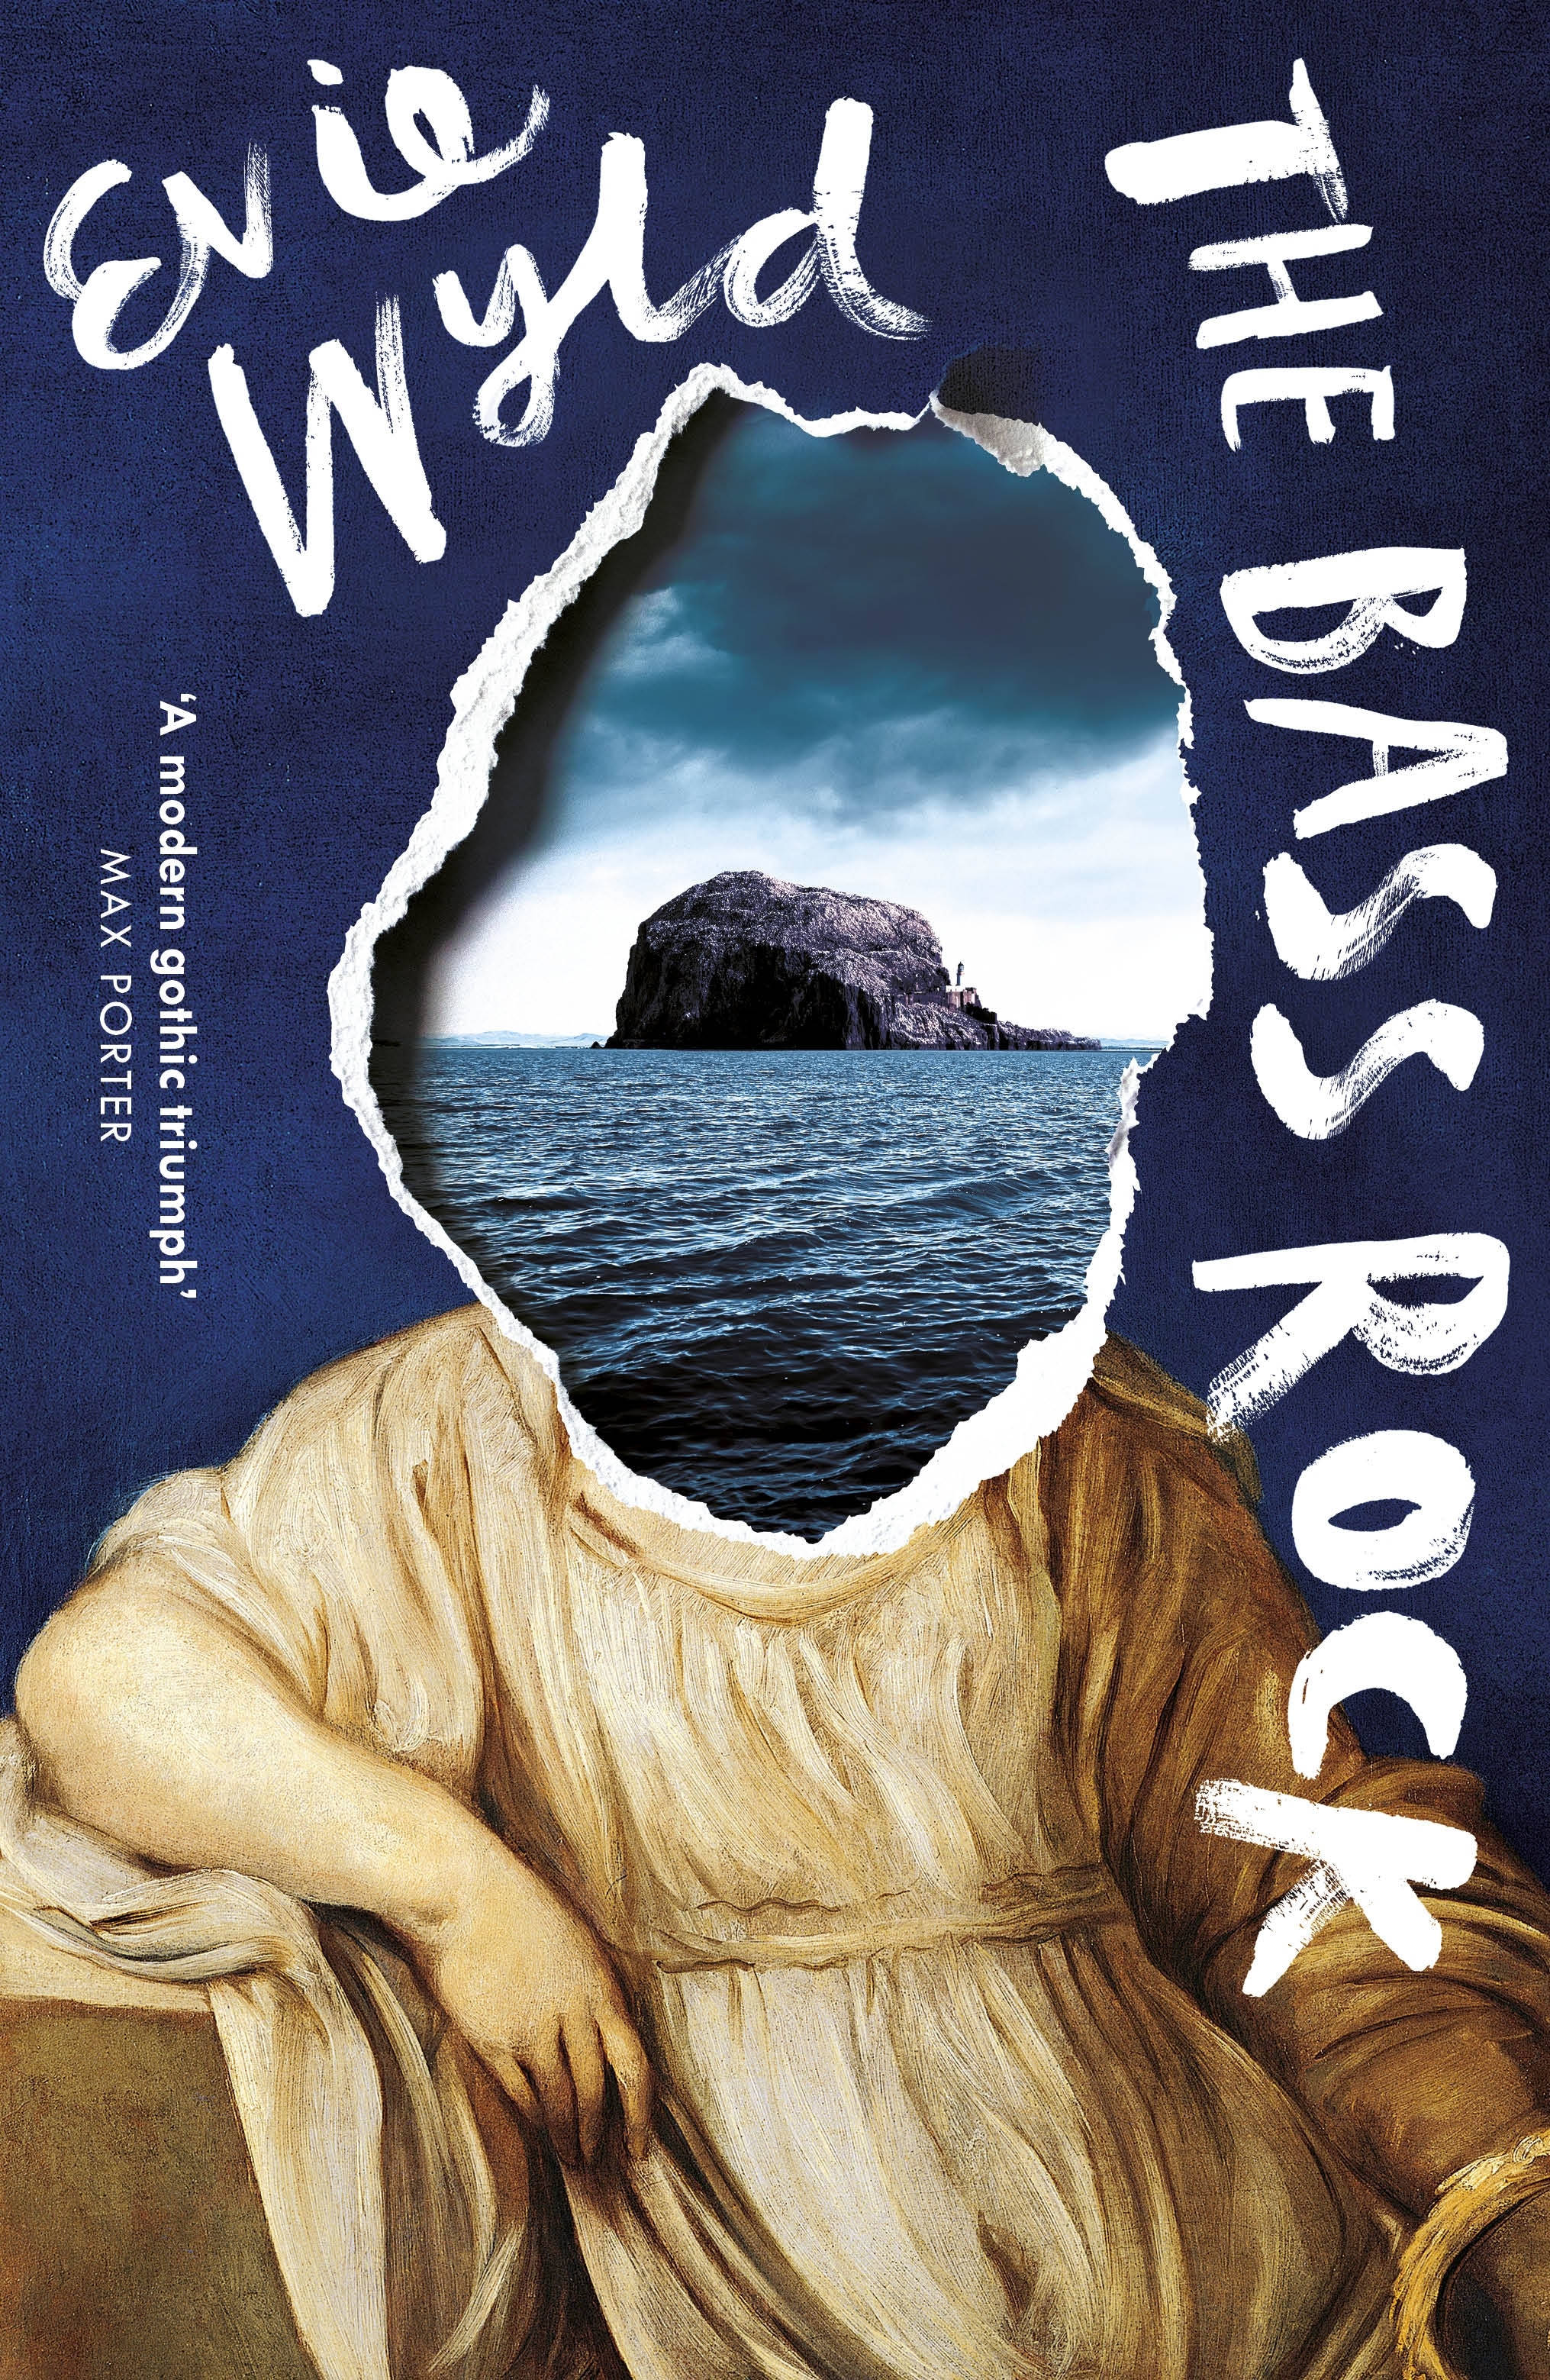 Book “The Bass Rock” by Evie Wyld — August 5, 2021